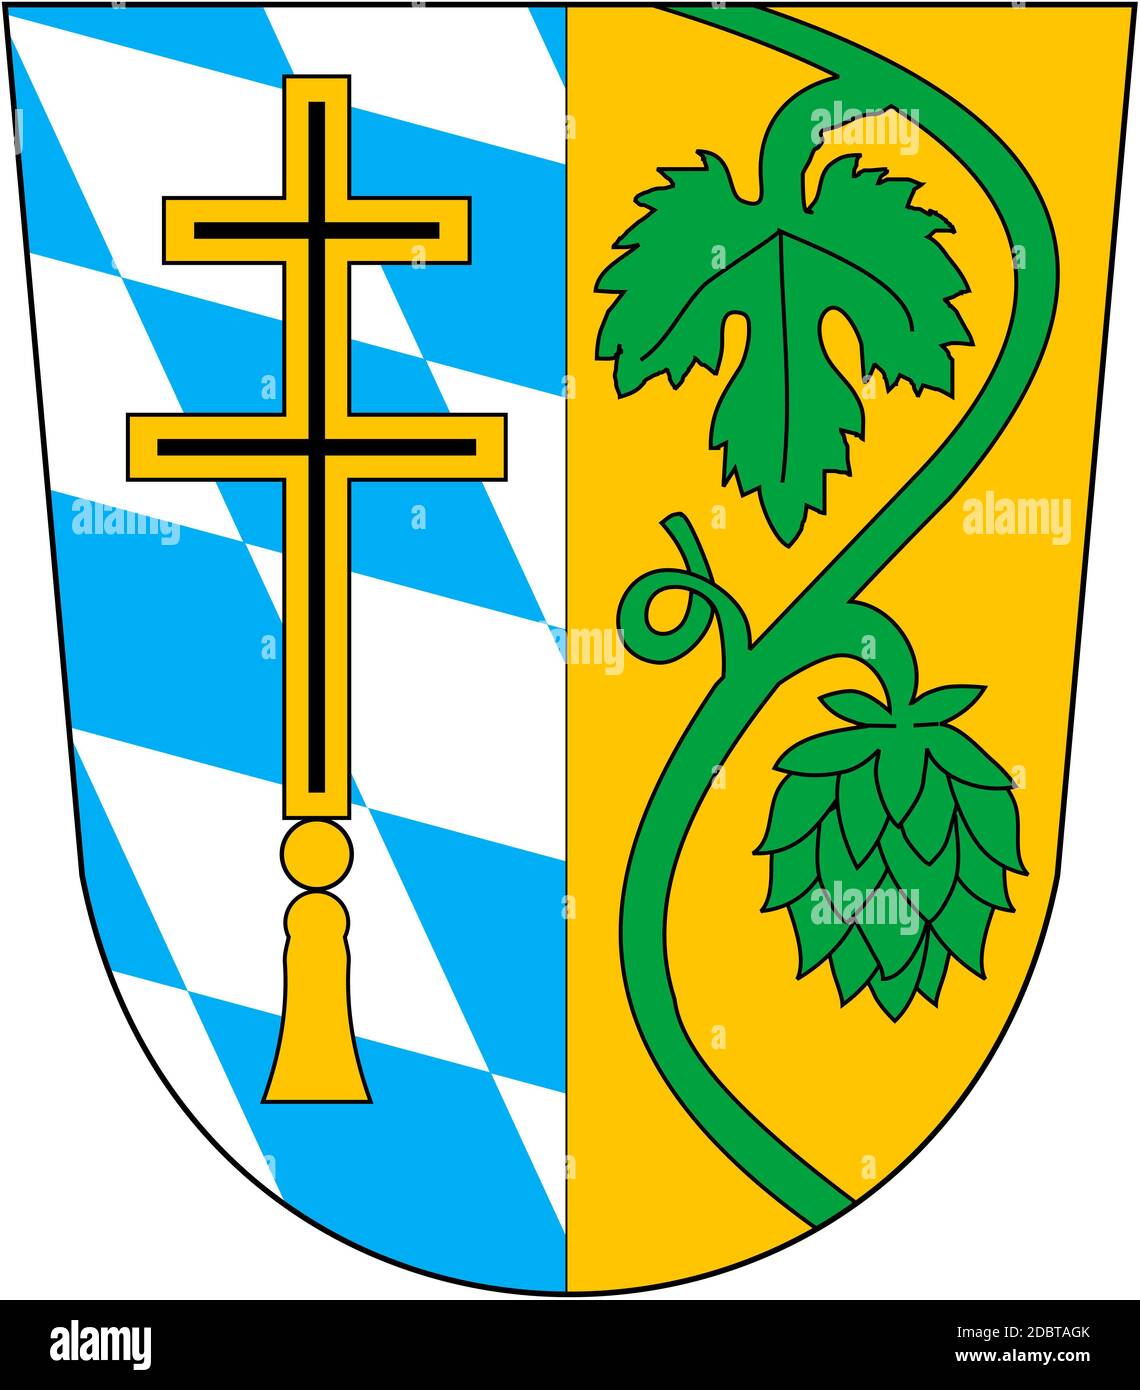 Coat of arms of the Pfaffenhofen an der Ilm district. Germany Stock Photo